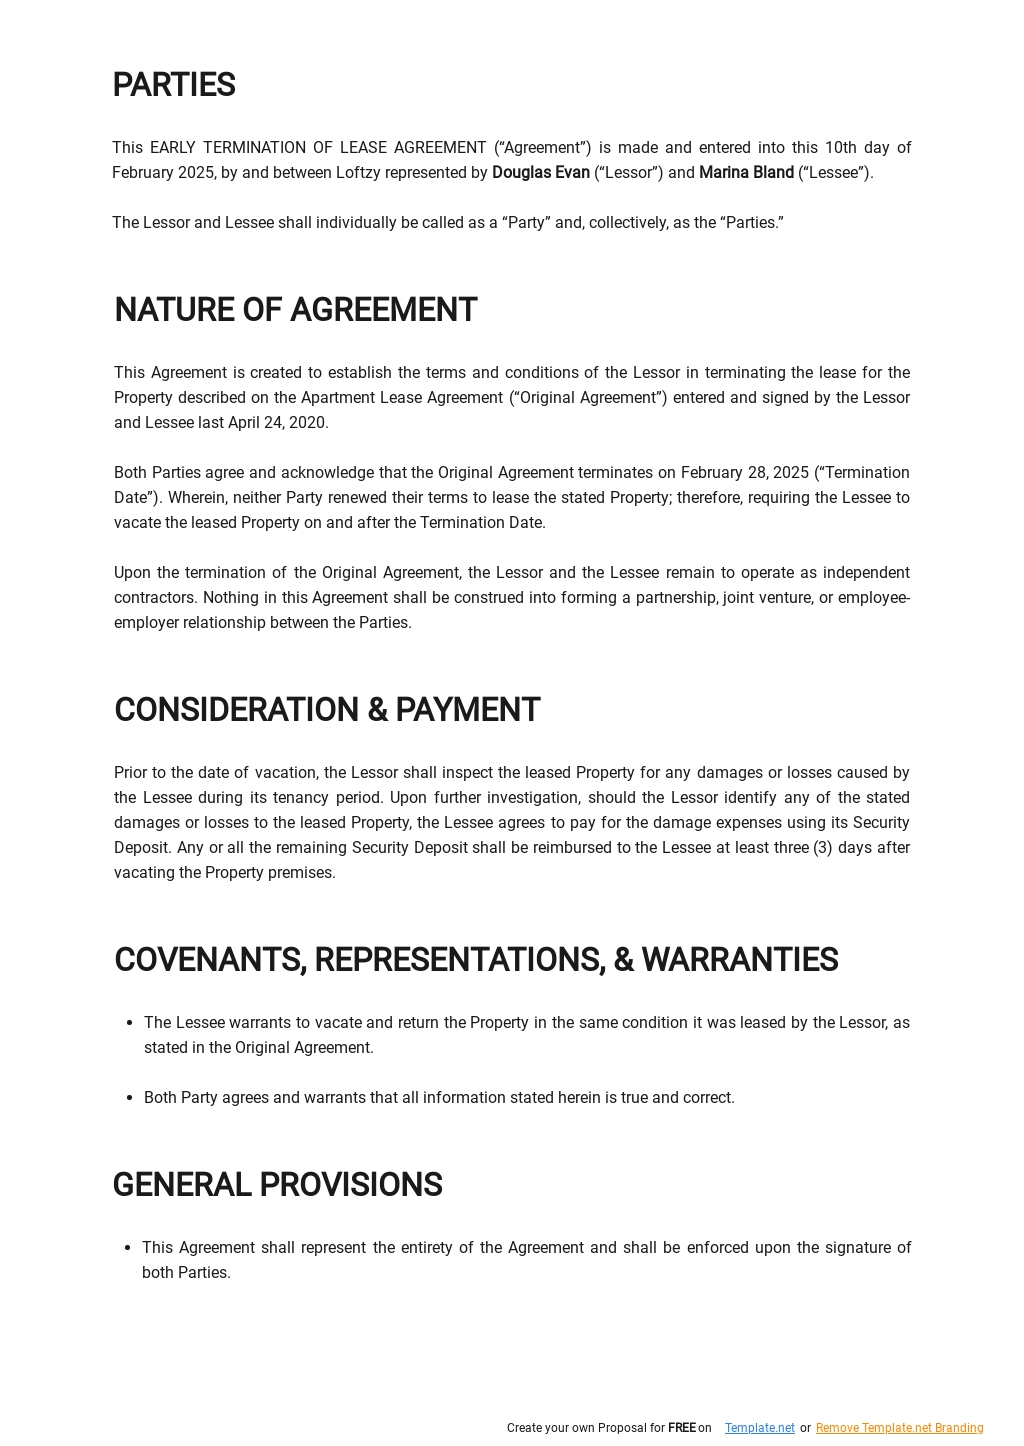 Early Termination Of Lease Agreement Template 1.jpe